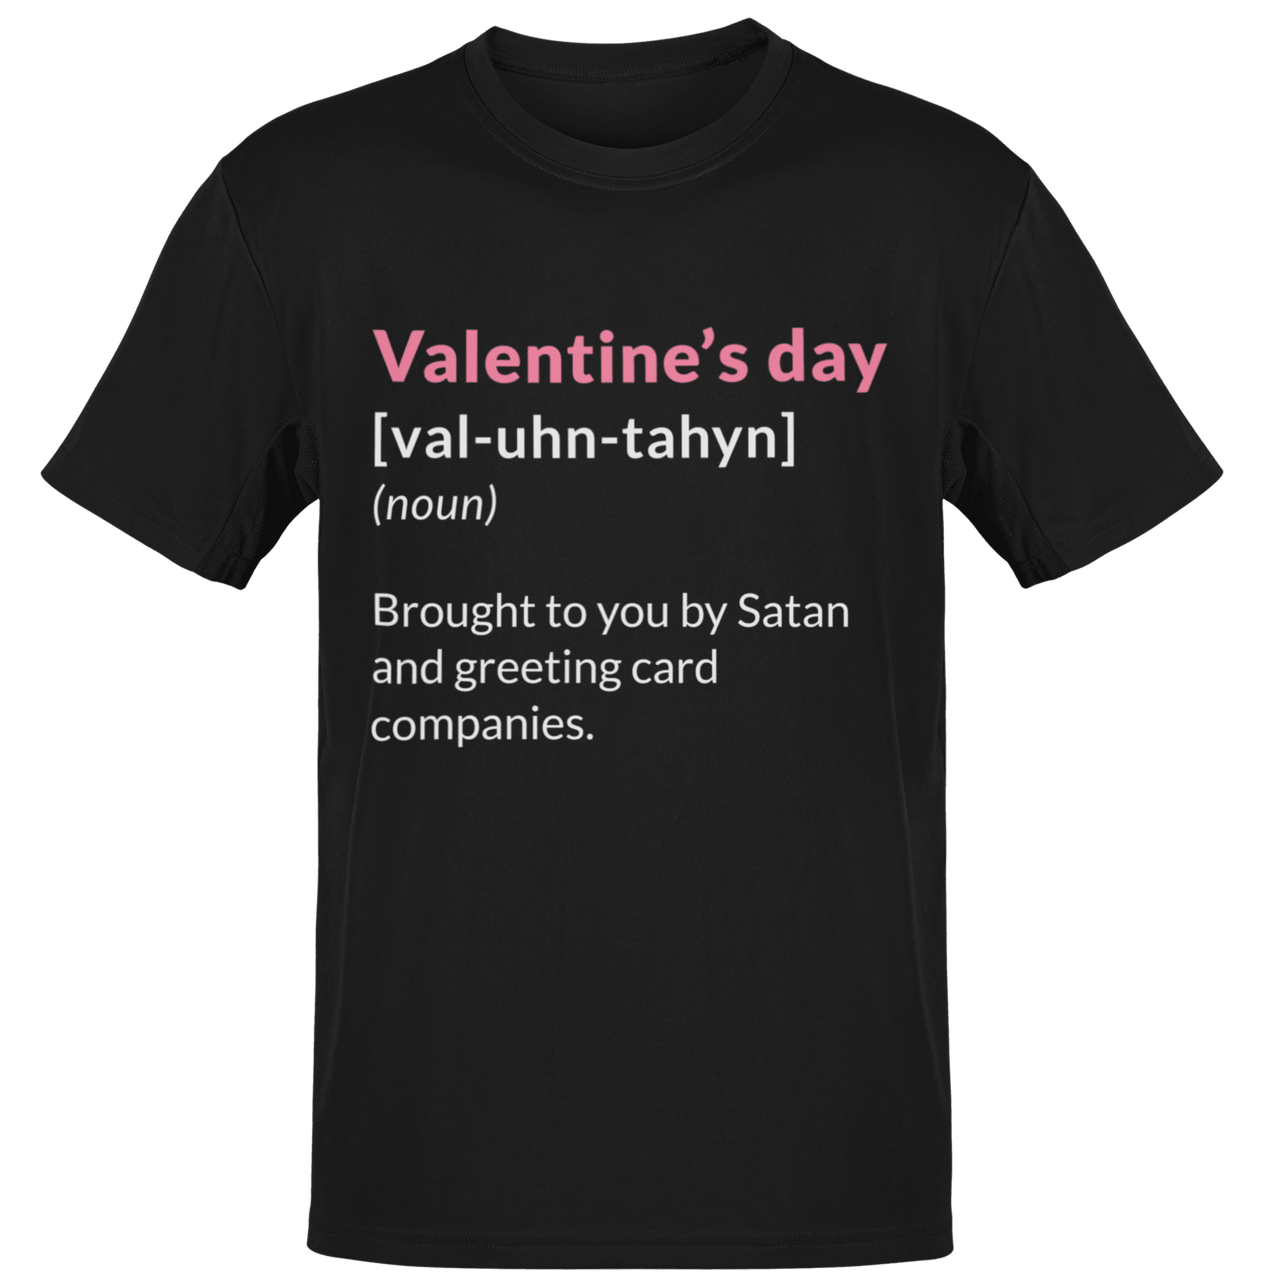 Valentine's Day Definition Brought To You By Satan Adult Unisex T-Shirt 8Ball